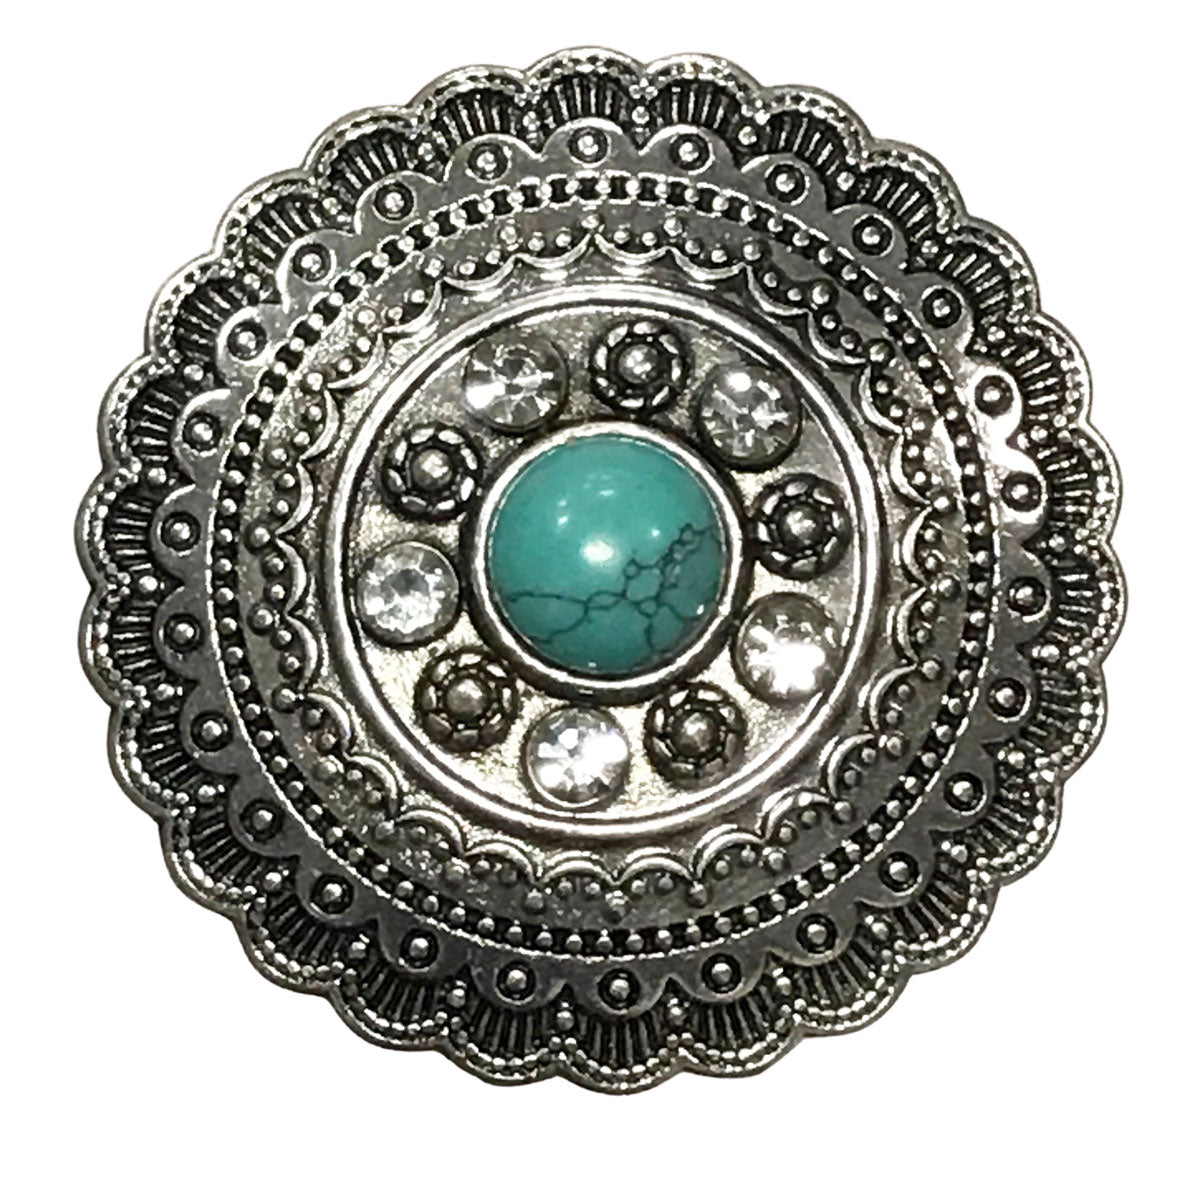 Faux Turquoise bead center in mandala setting. Magnetic Brooch for Scarves Artistic Sculptural shapes add a personality to absolutely anything you wish to put your stamp on! The Super Strong Magnet is enough for a jacket lapel! Use to hold a sarong or cardigan together.  Great to adorn a hat or to hold a scarf in place with Fabric Safe Magnet.